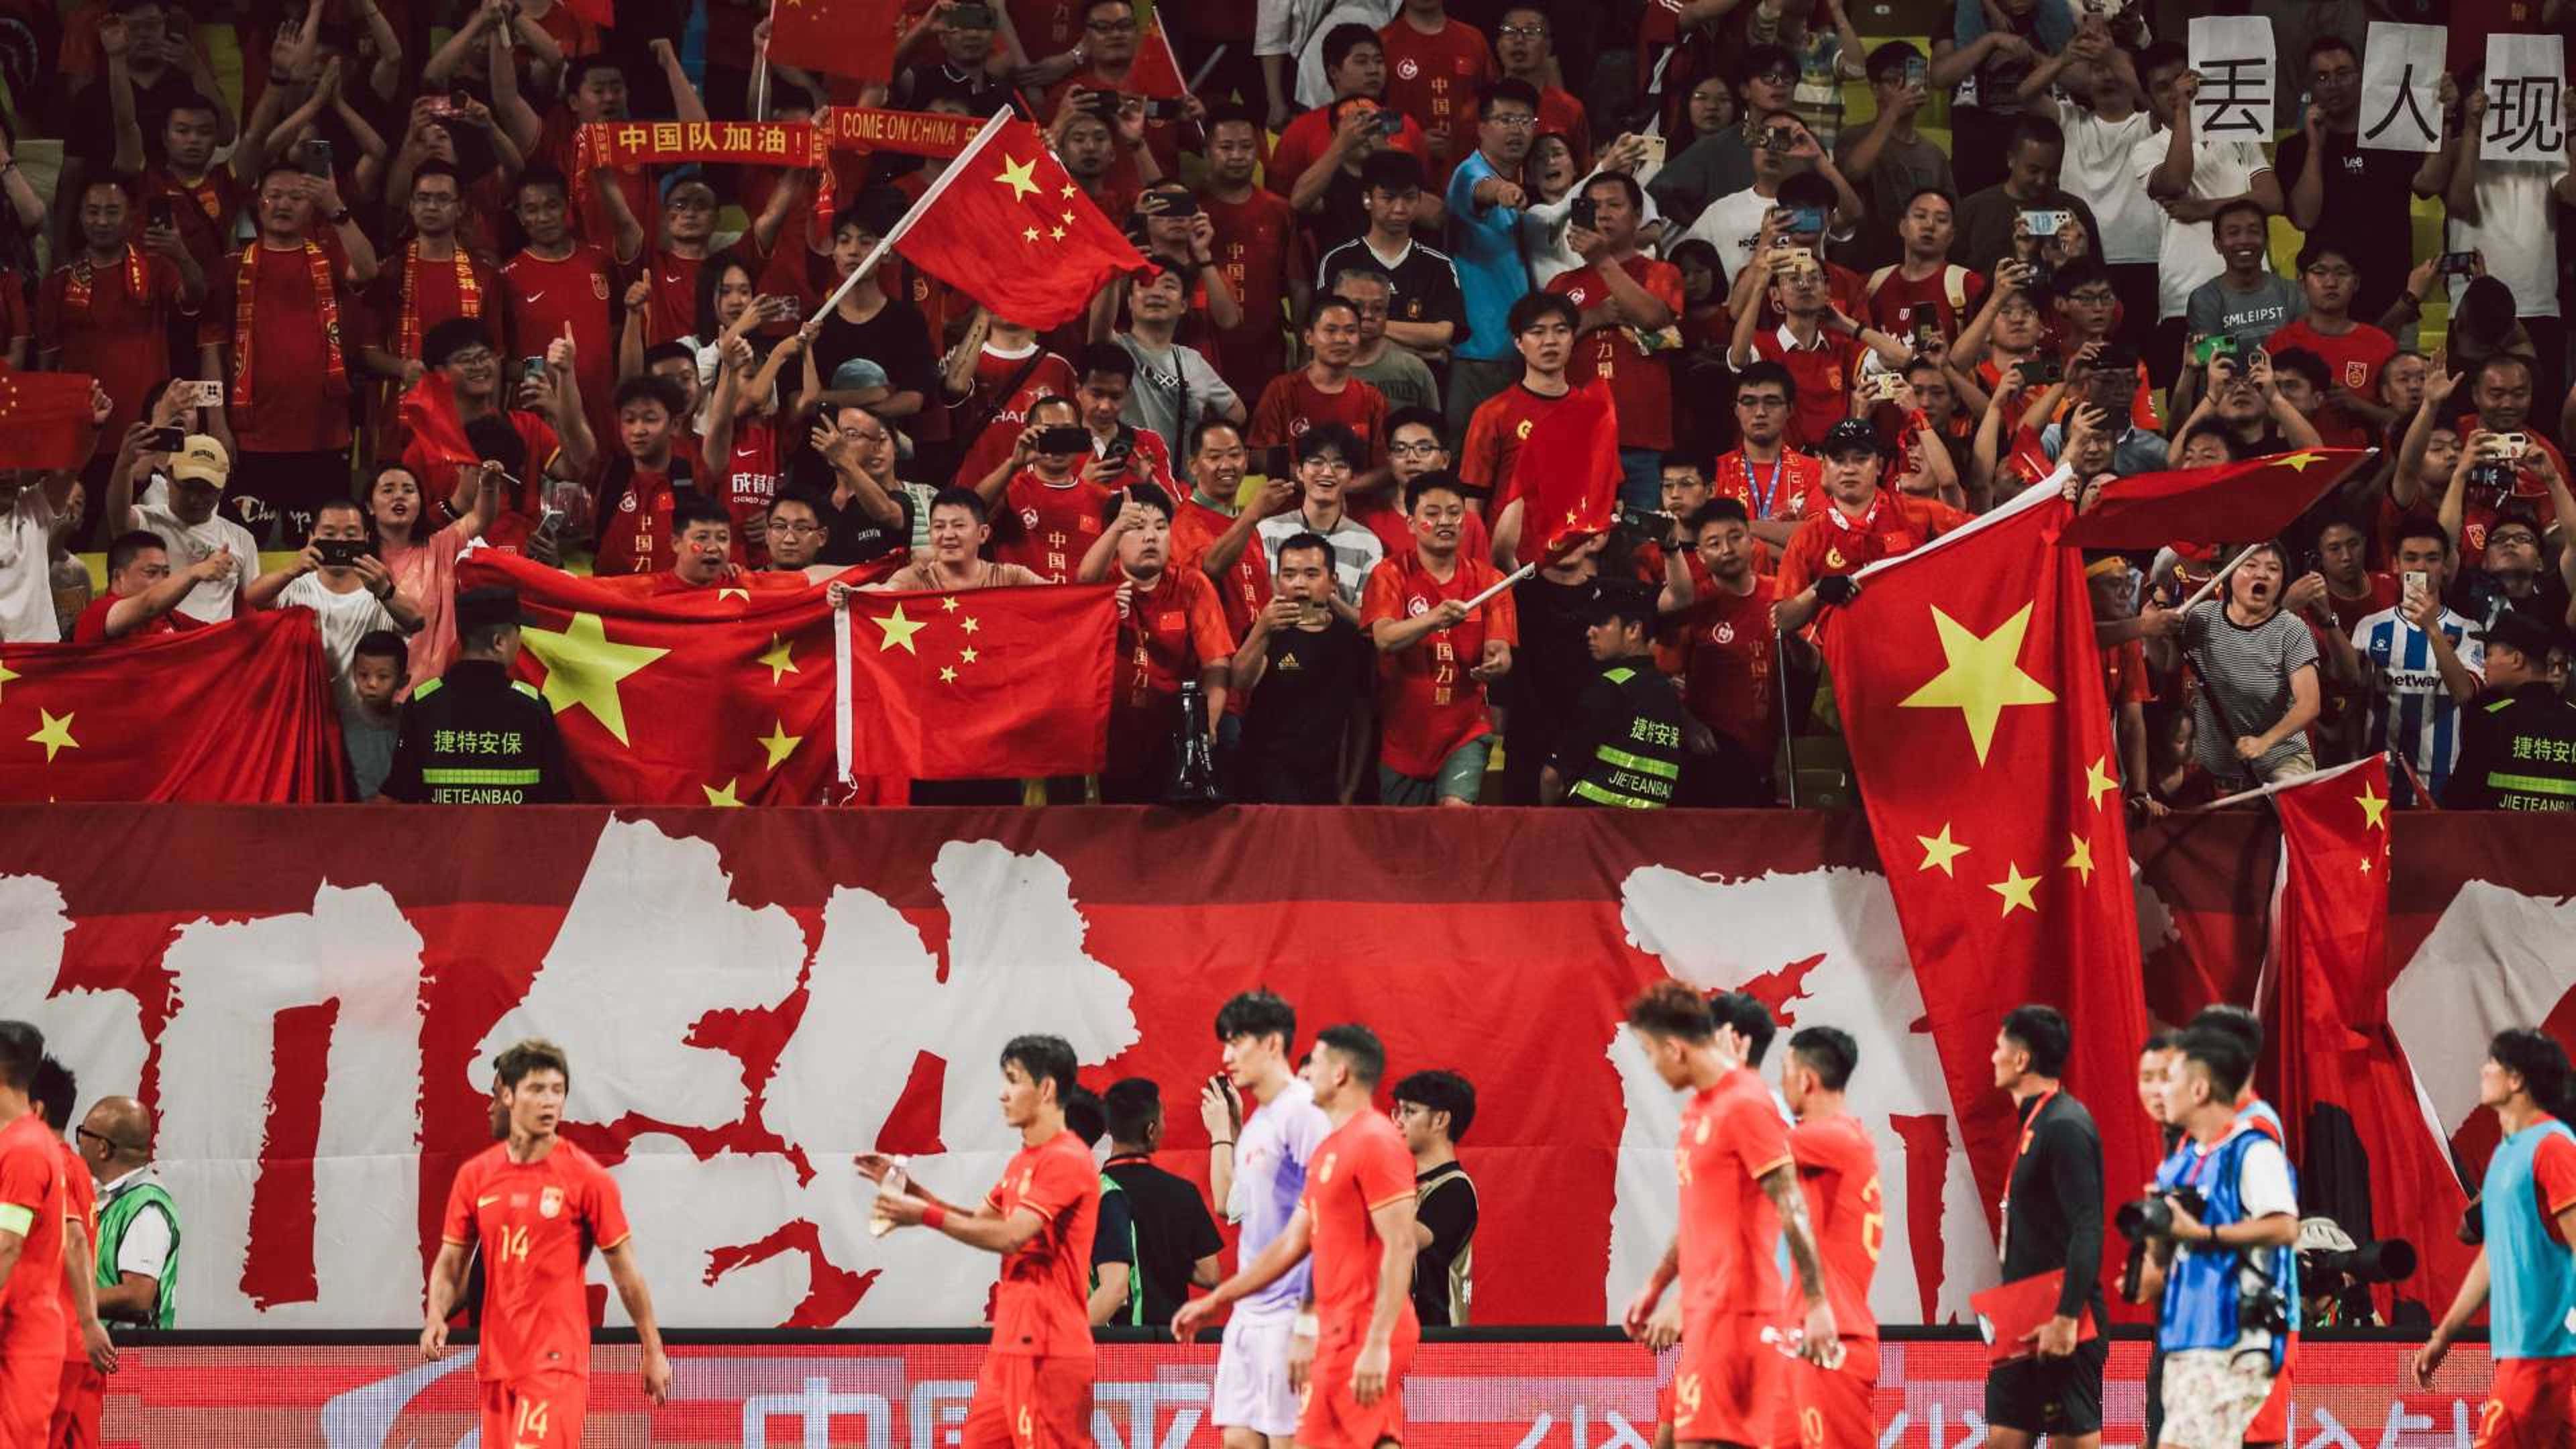 20230913 Chinese supporters